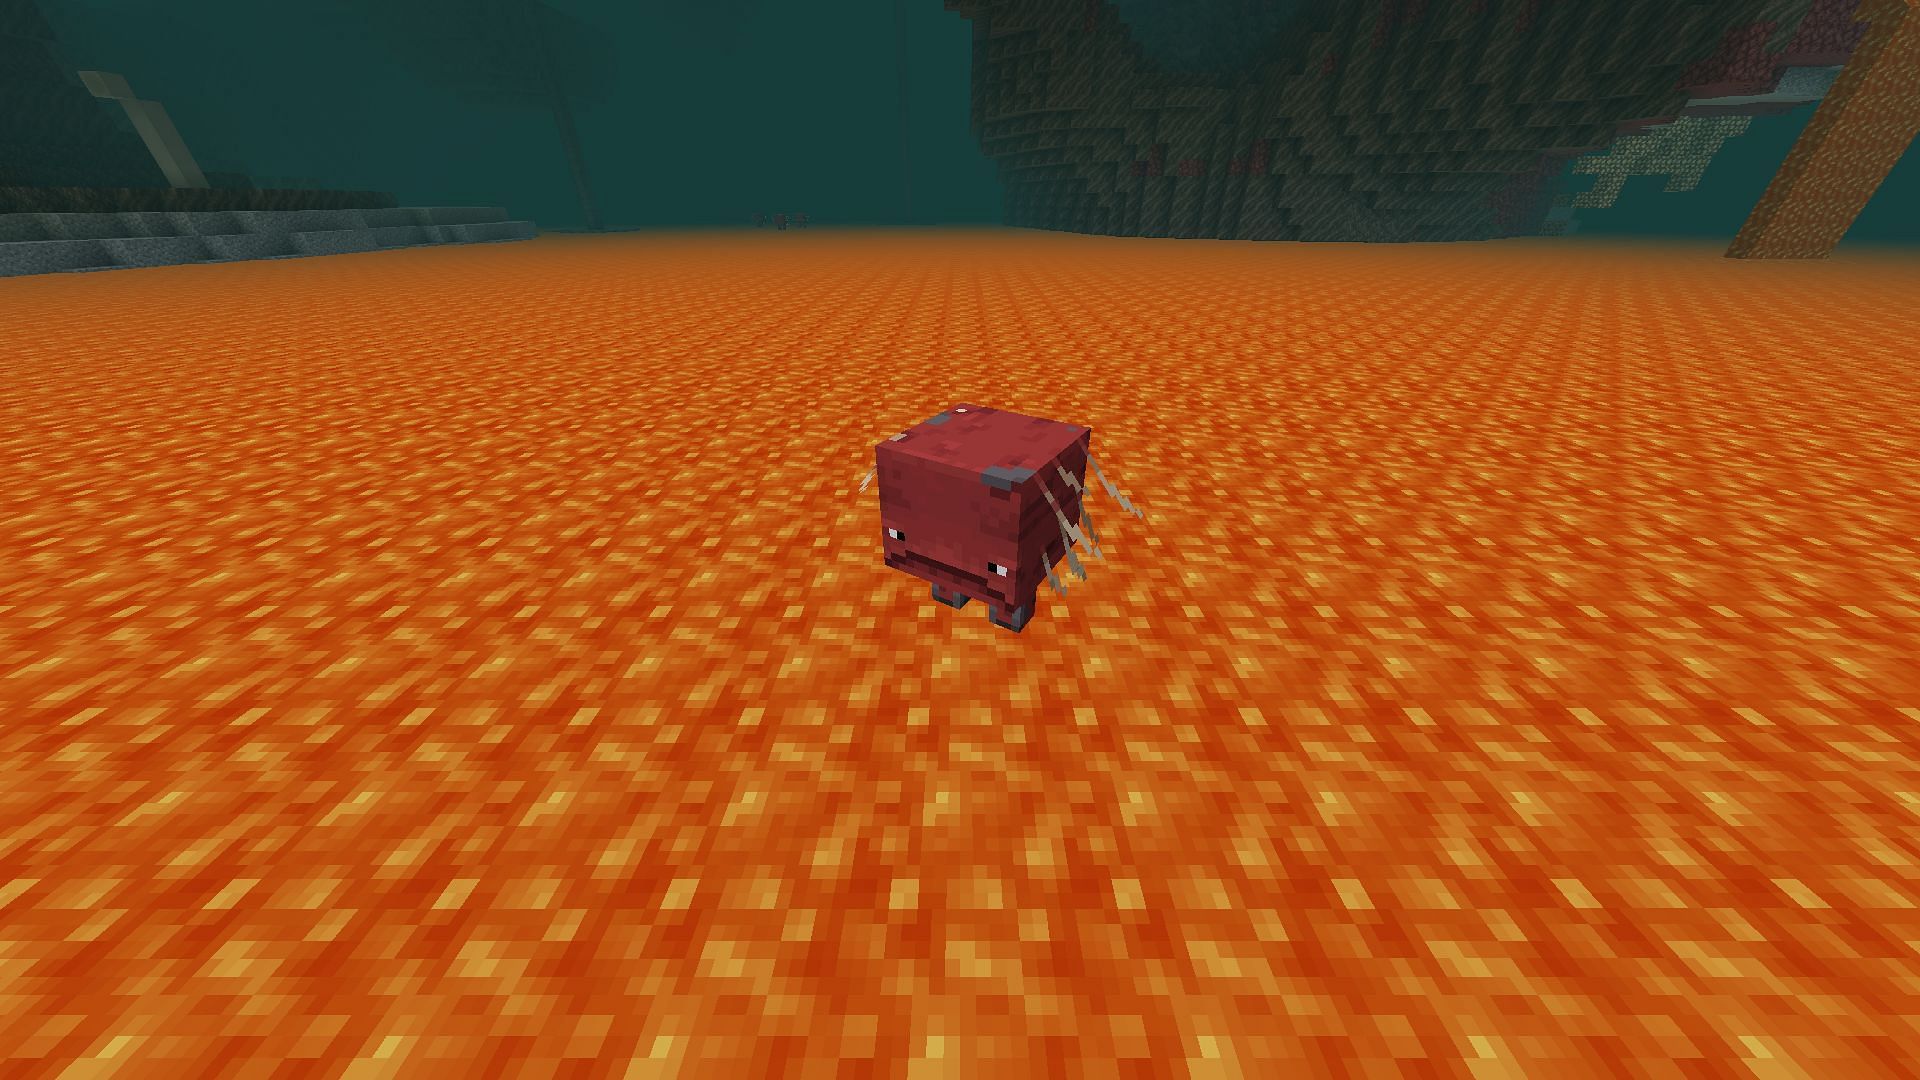 Striders can be ridden using saddles and warped fungus on a stick in Minecraft (Image via Mojang)